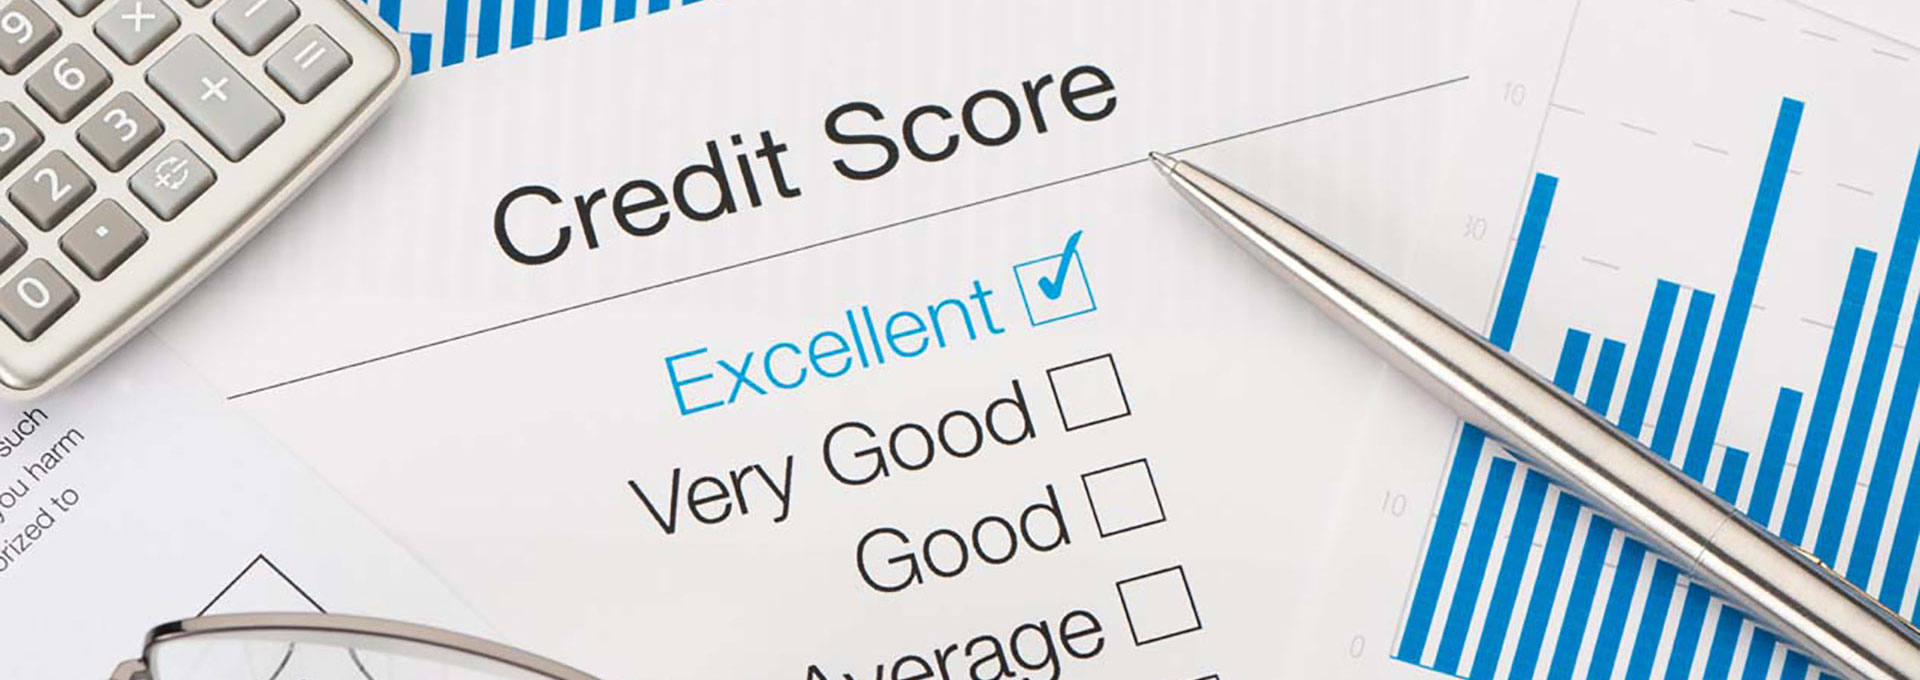 Why is an Equifax Credit Score so important?